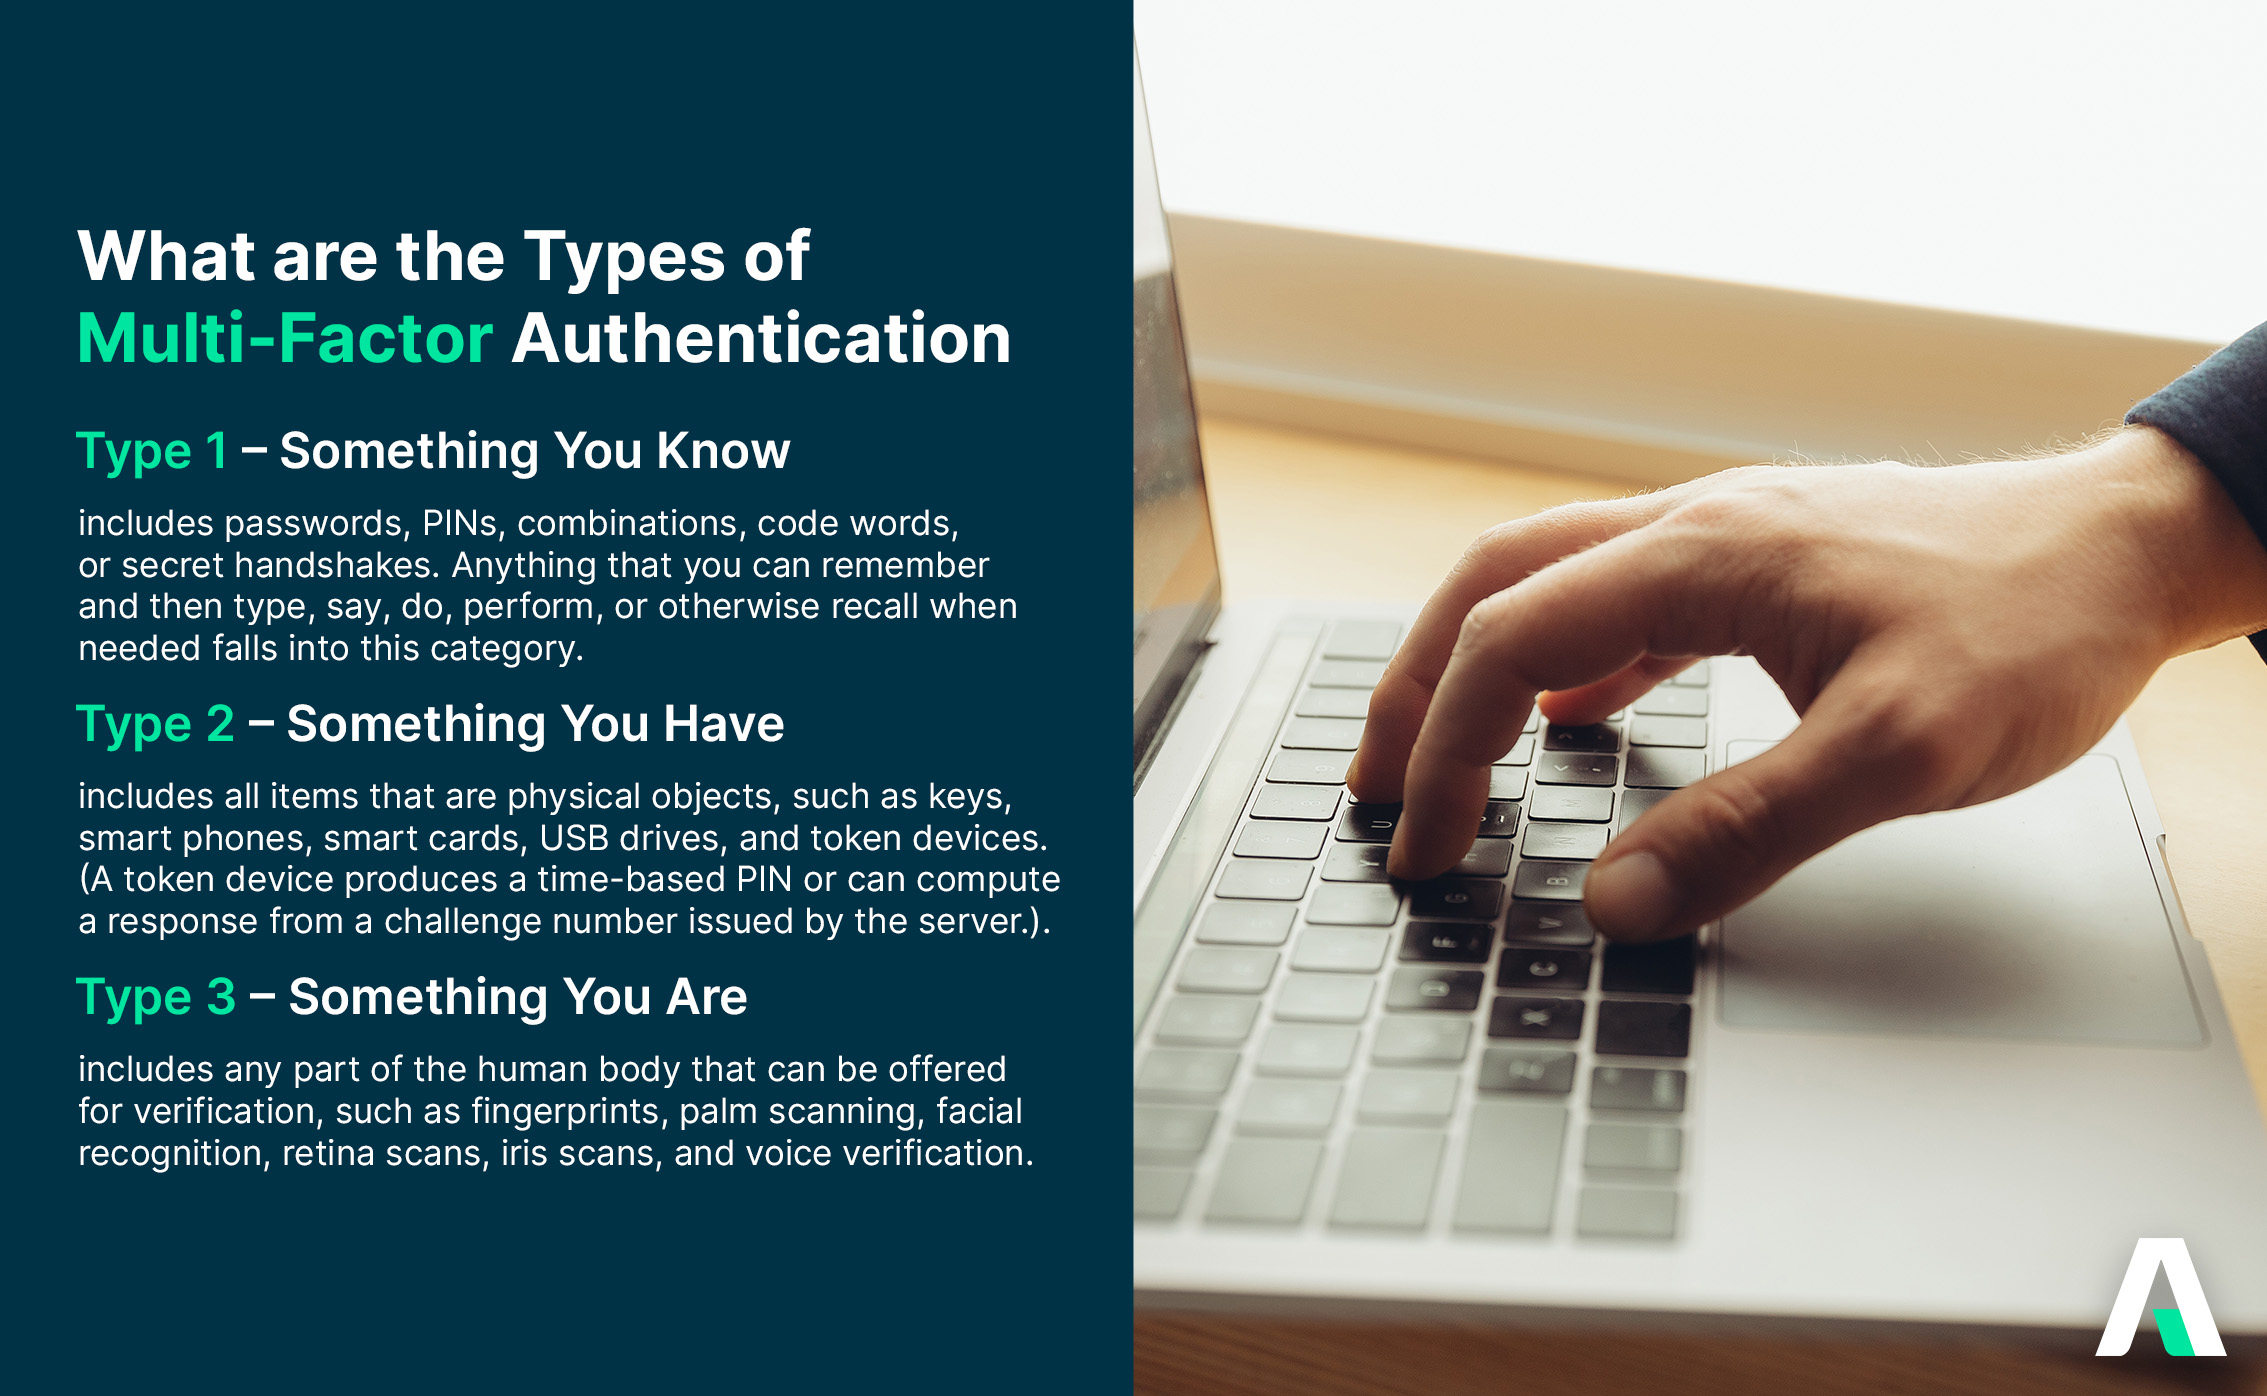 Types of Multi-factor Authentication